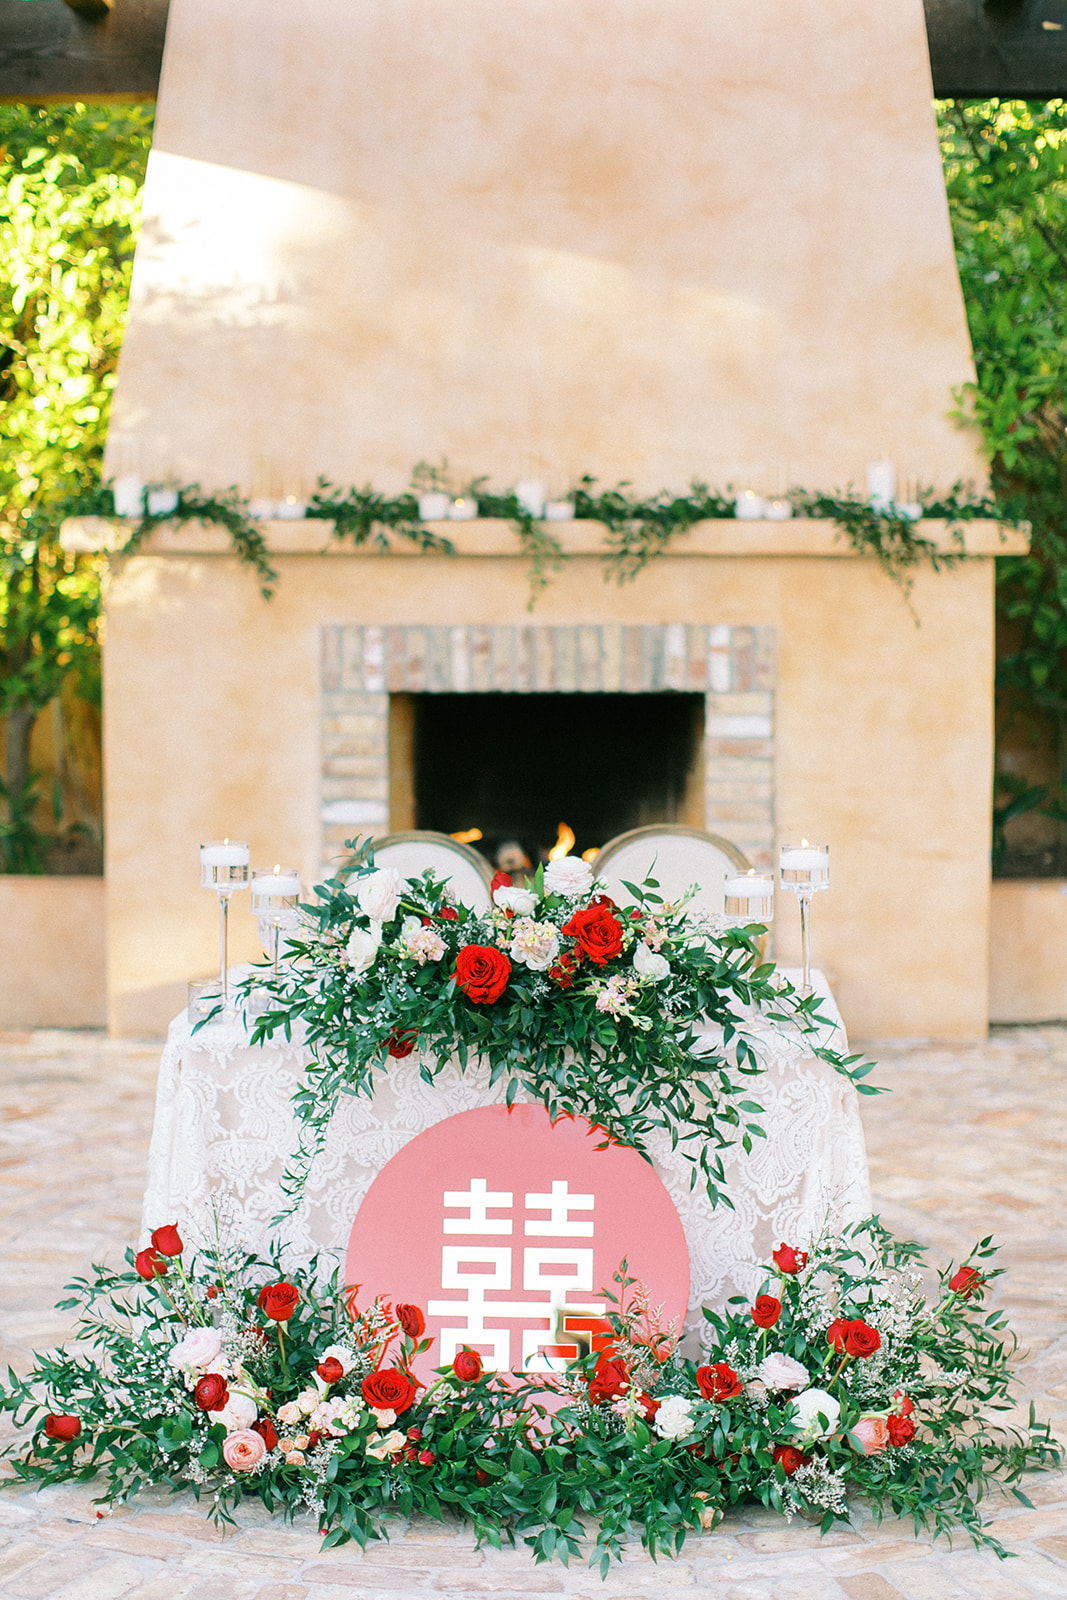 Sweetheart table floral arrangements of greenery and lush red, white, and pink roses on table and ground.